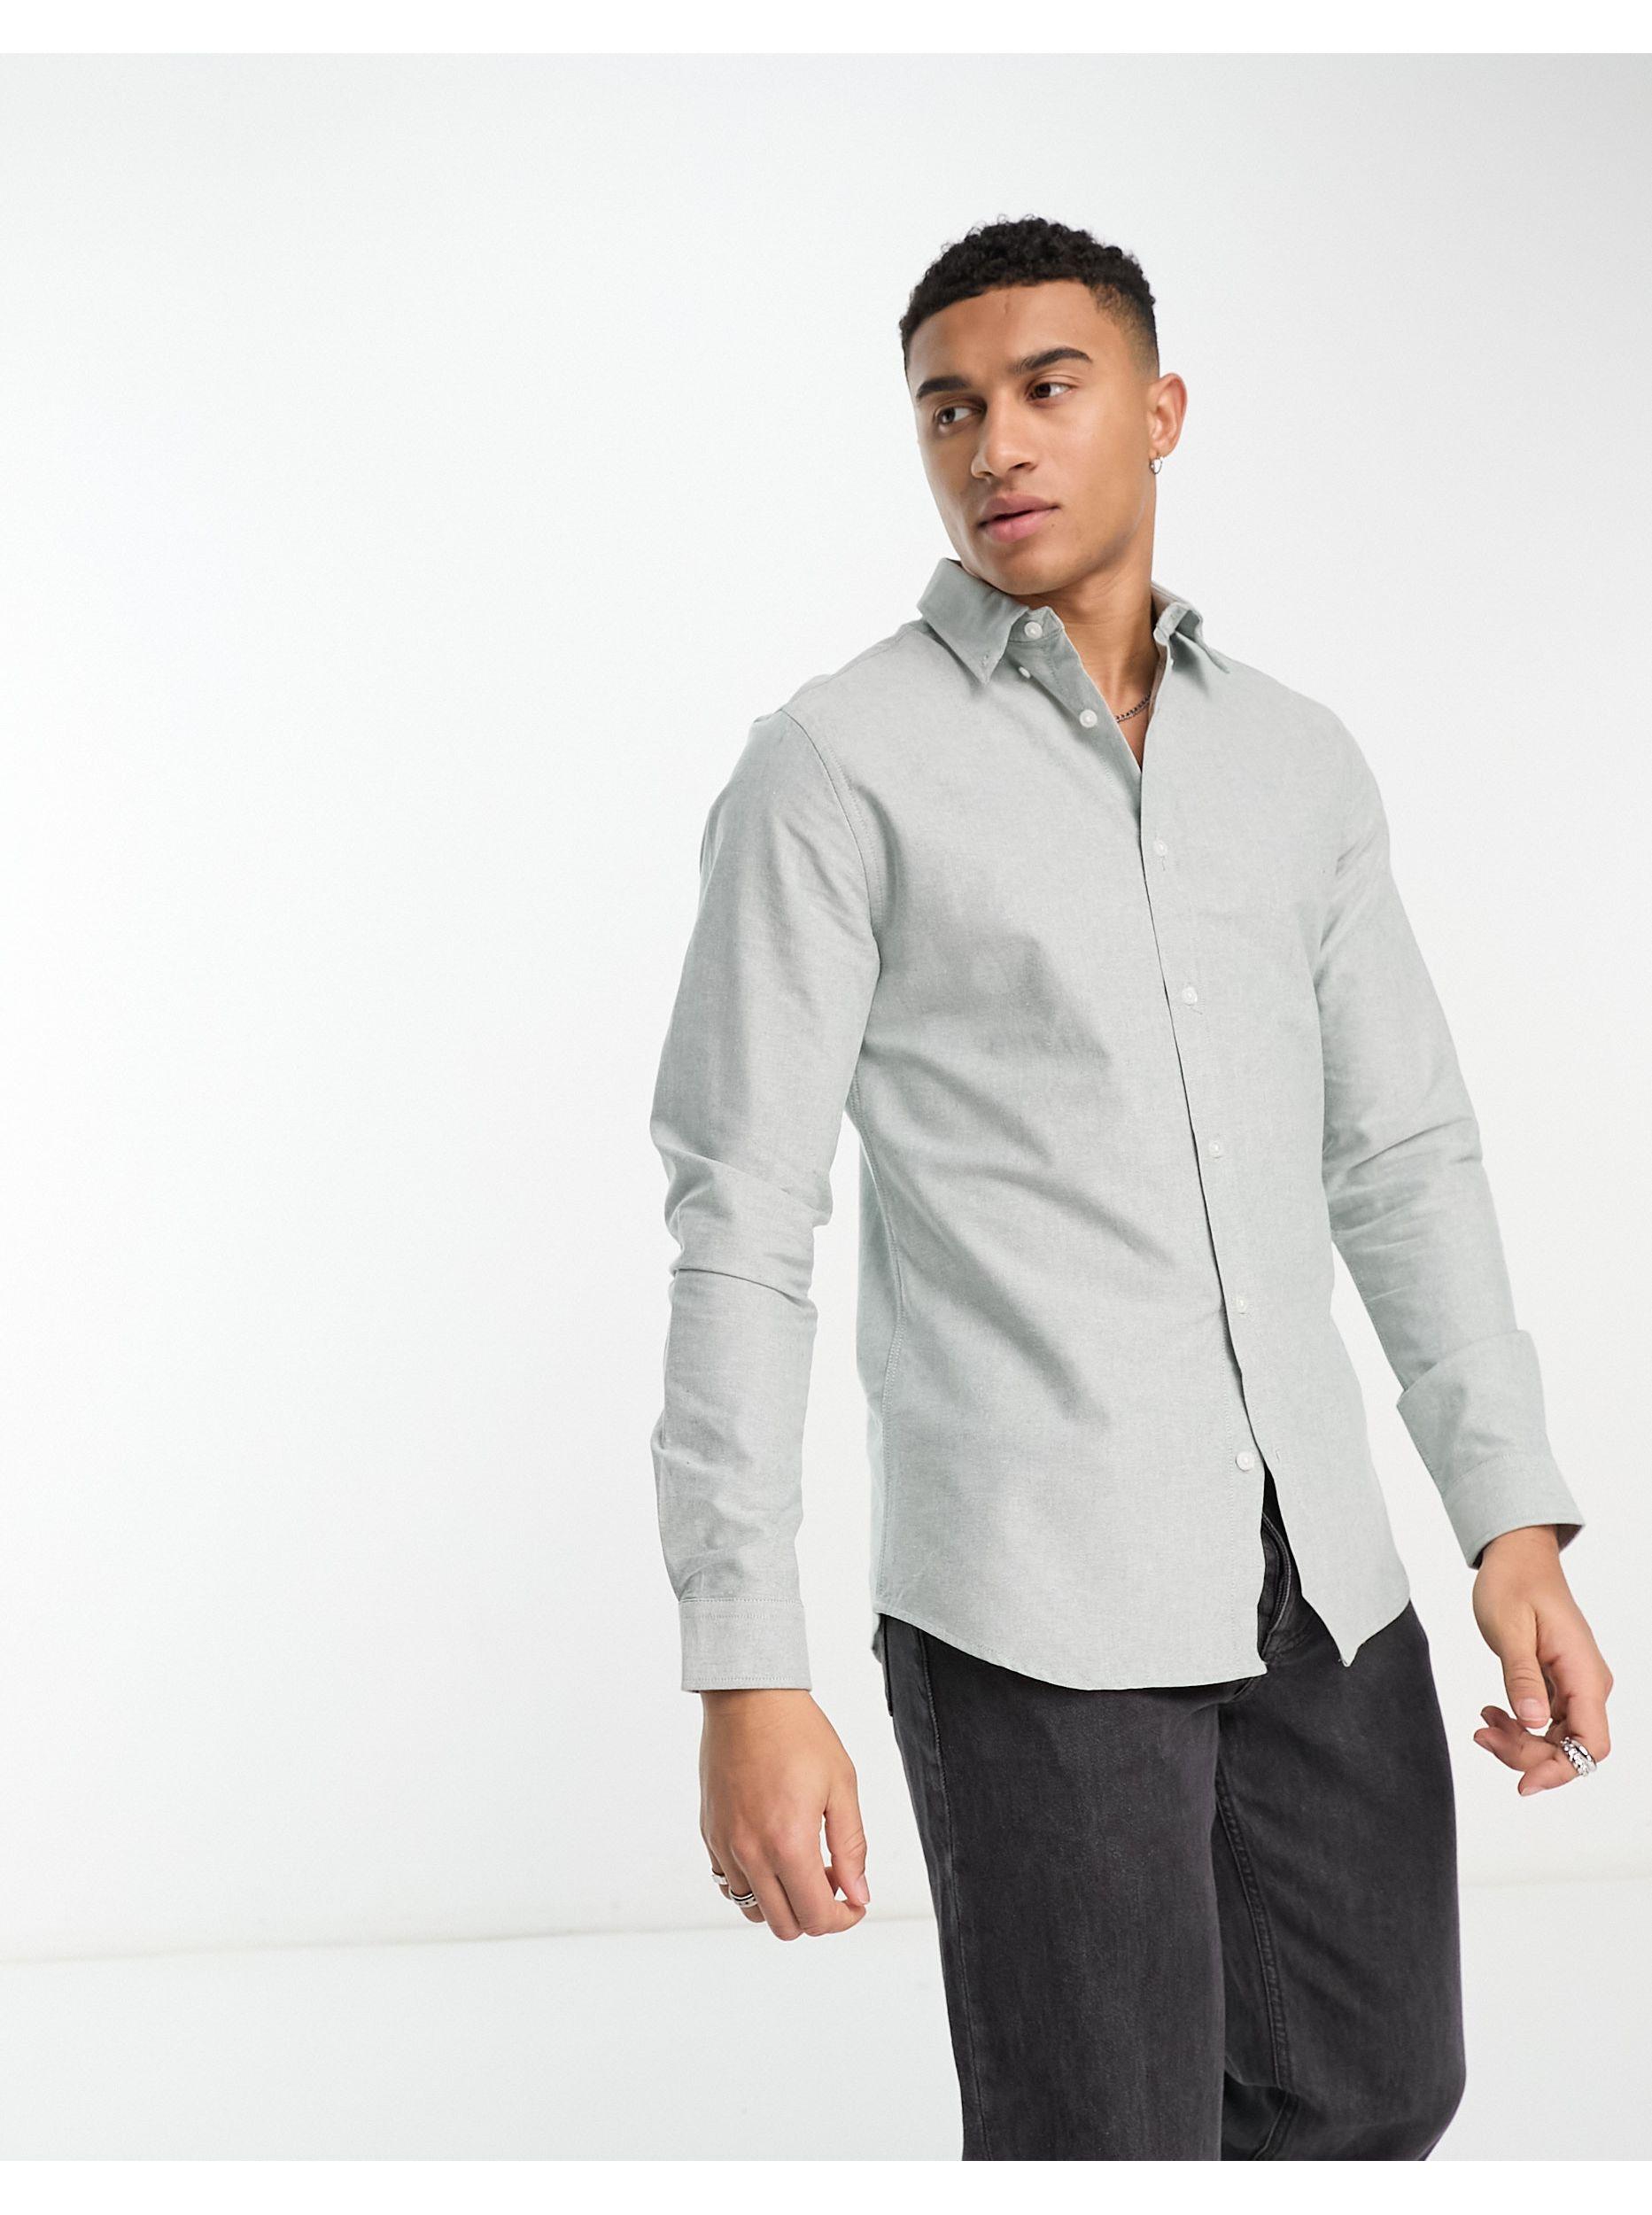 River Island Long Sleeve Smart Oxford Shirt in Gray for Men | Lyst